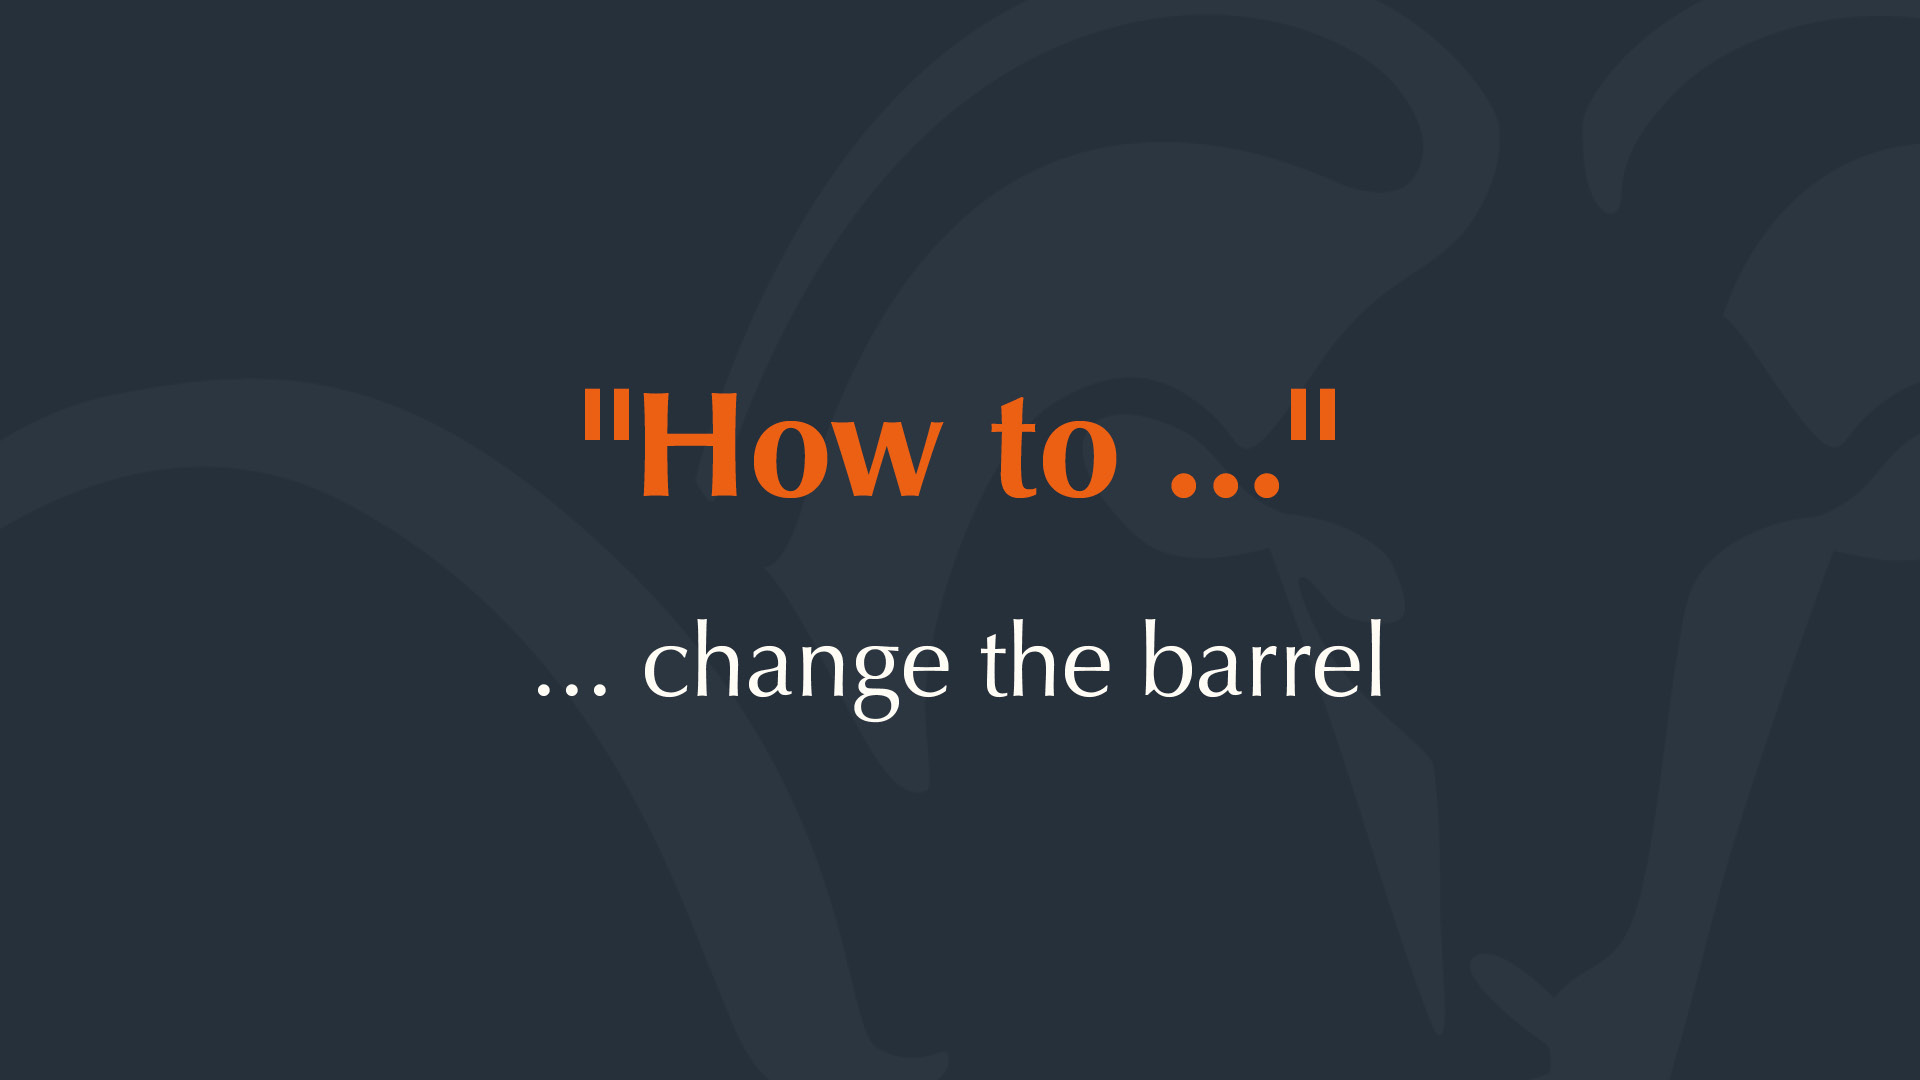 How to ... change the barrel.